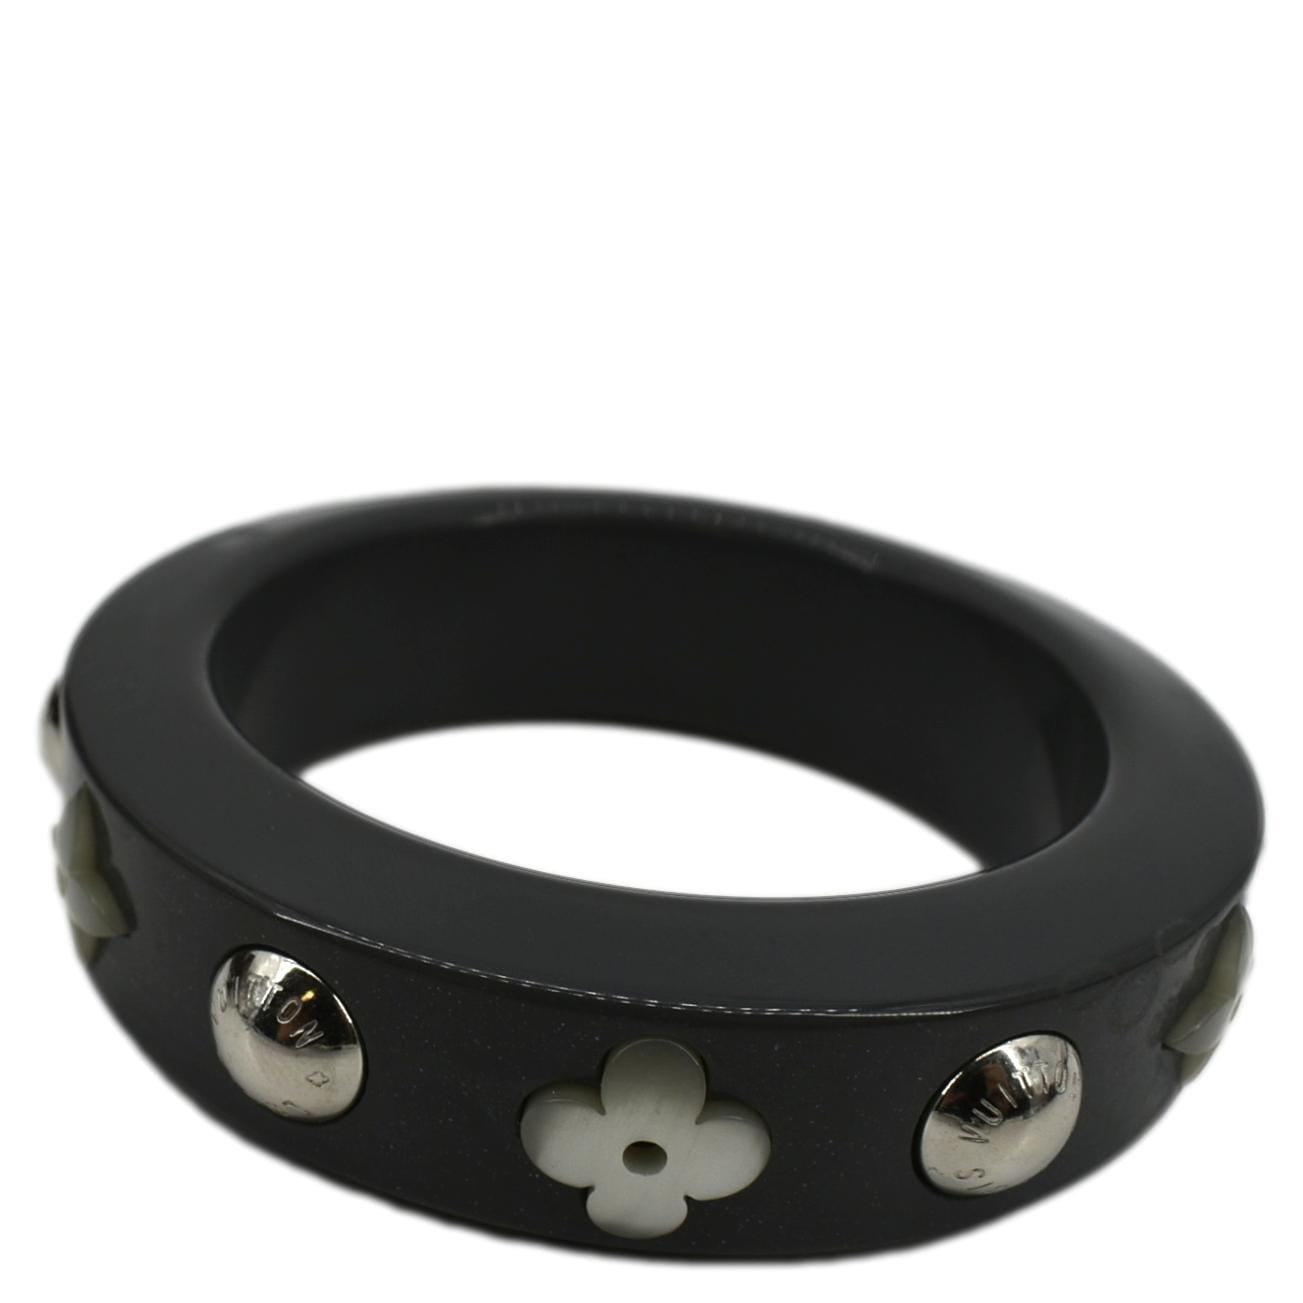 Louis Vuitton, Jewelry, Louis Vuitton Resin Bracelet With The Flowers